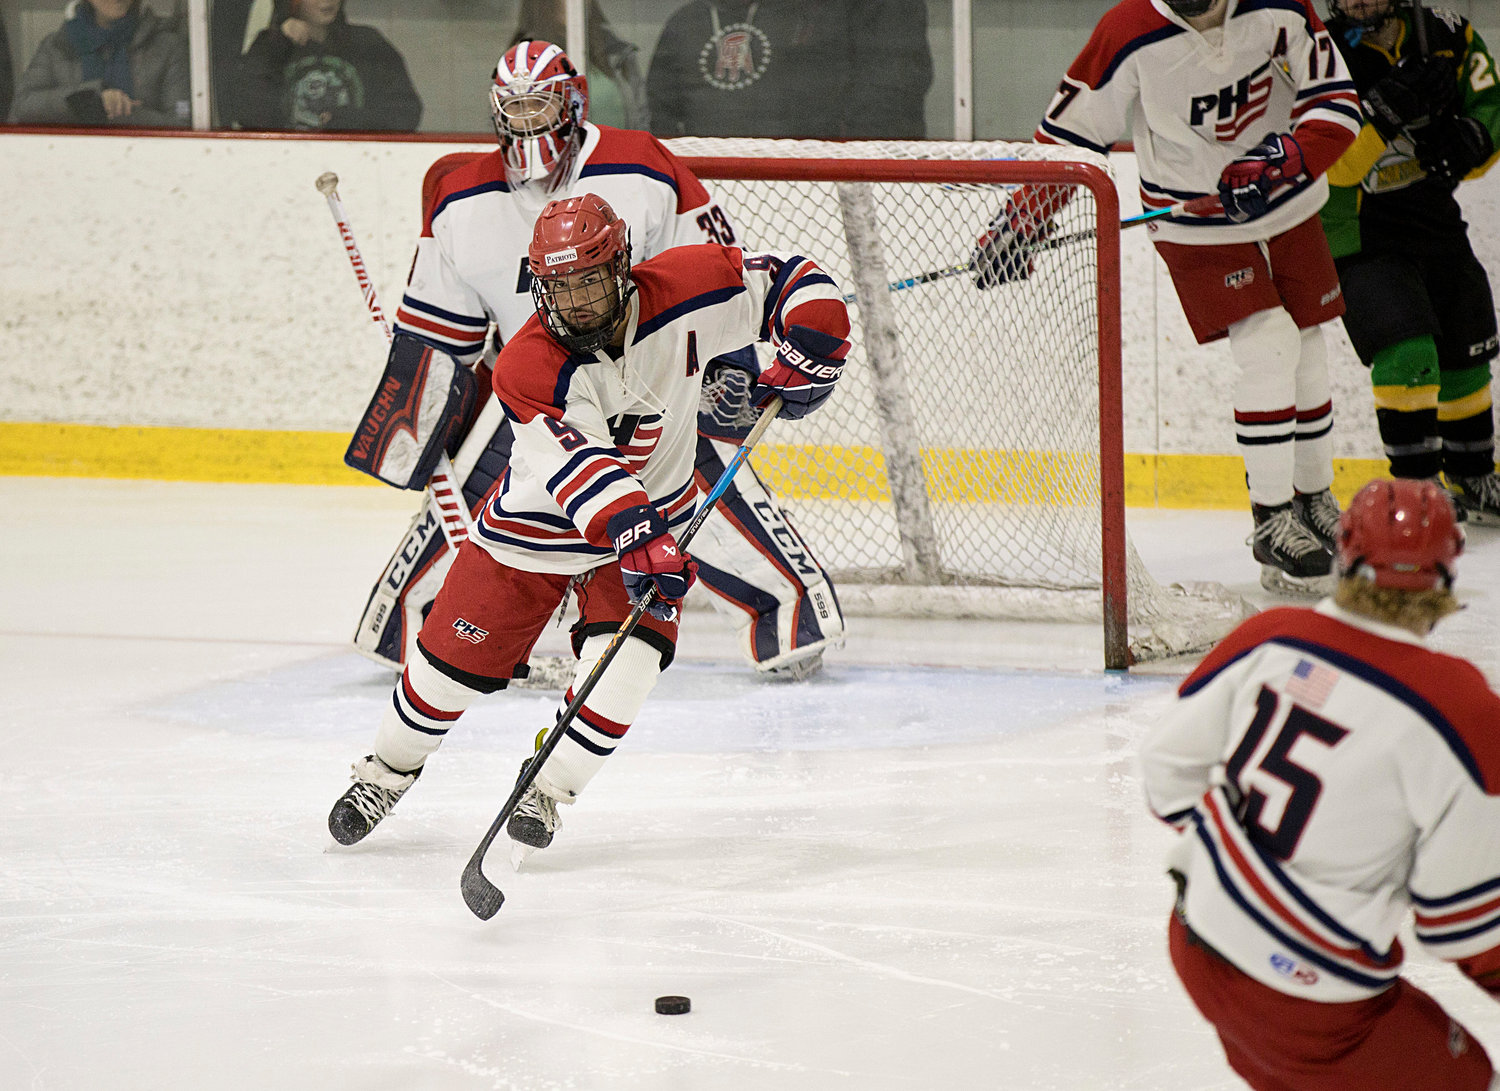 James LeBreux defends the goal during the third period of Friday’s matchup.